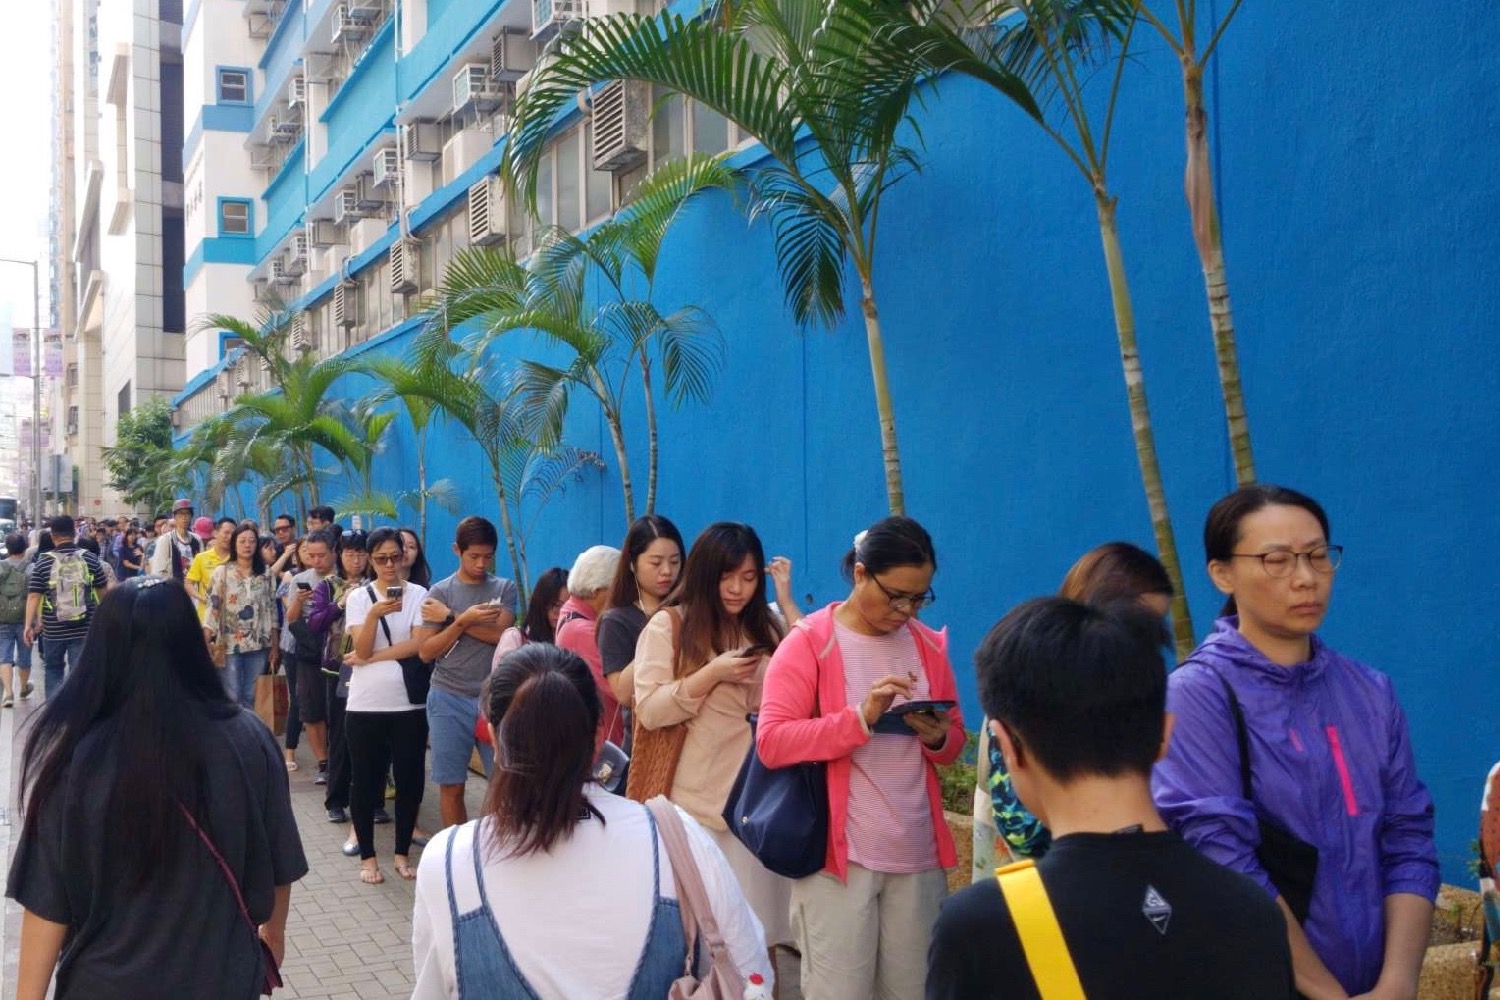 A like of voters waiting to cast ballots in today’s local elections snakes down the street in Tai Kok Tsui. Photo by Vicky Wong.